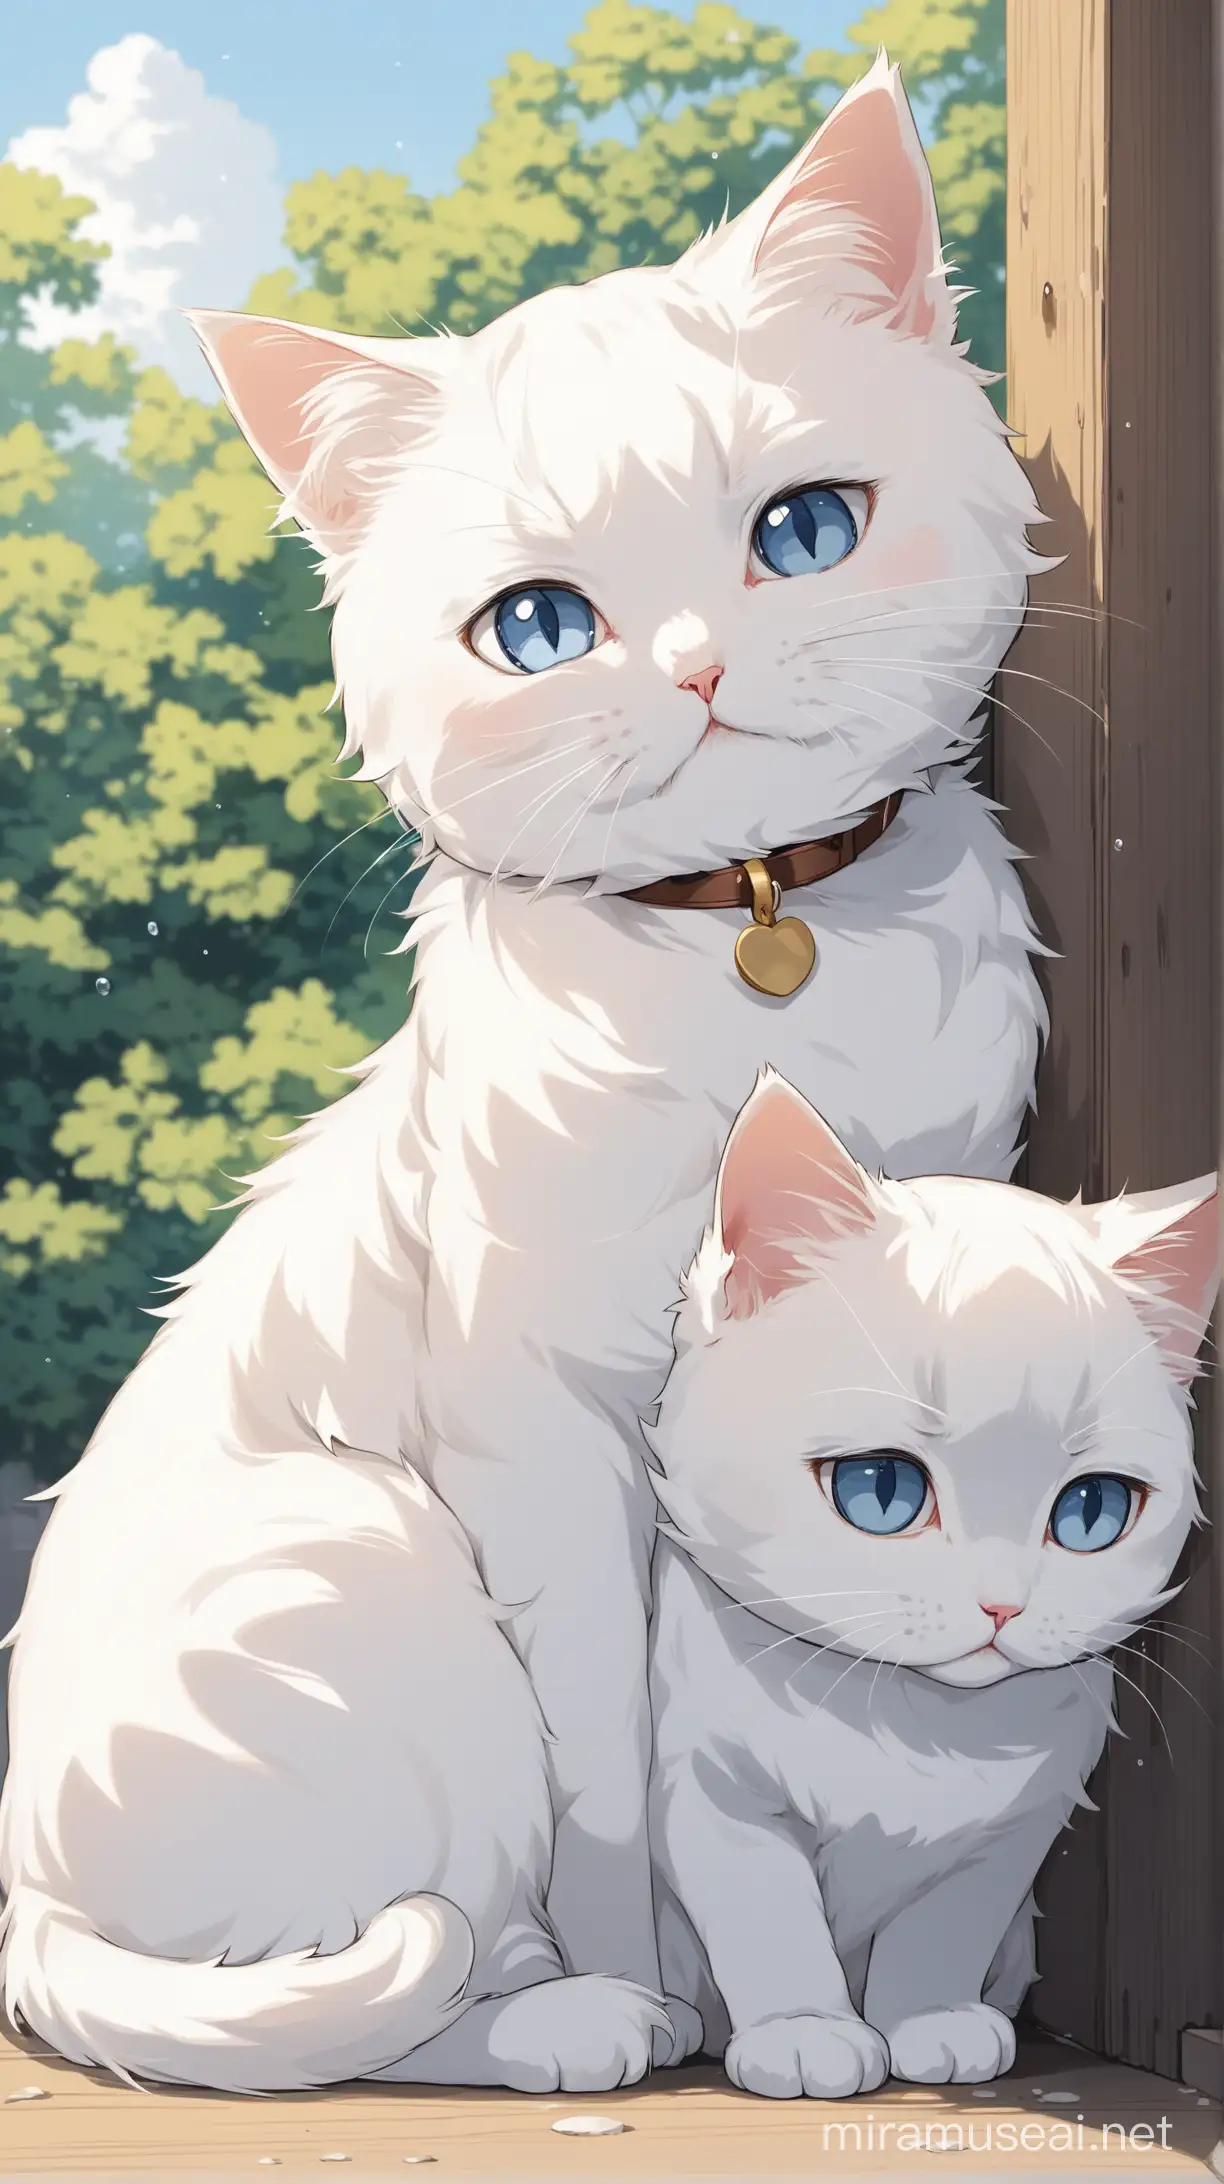 Two white cats are sad.